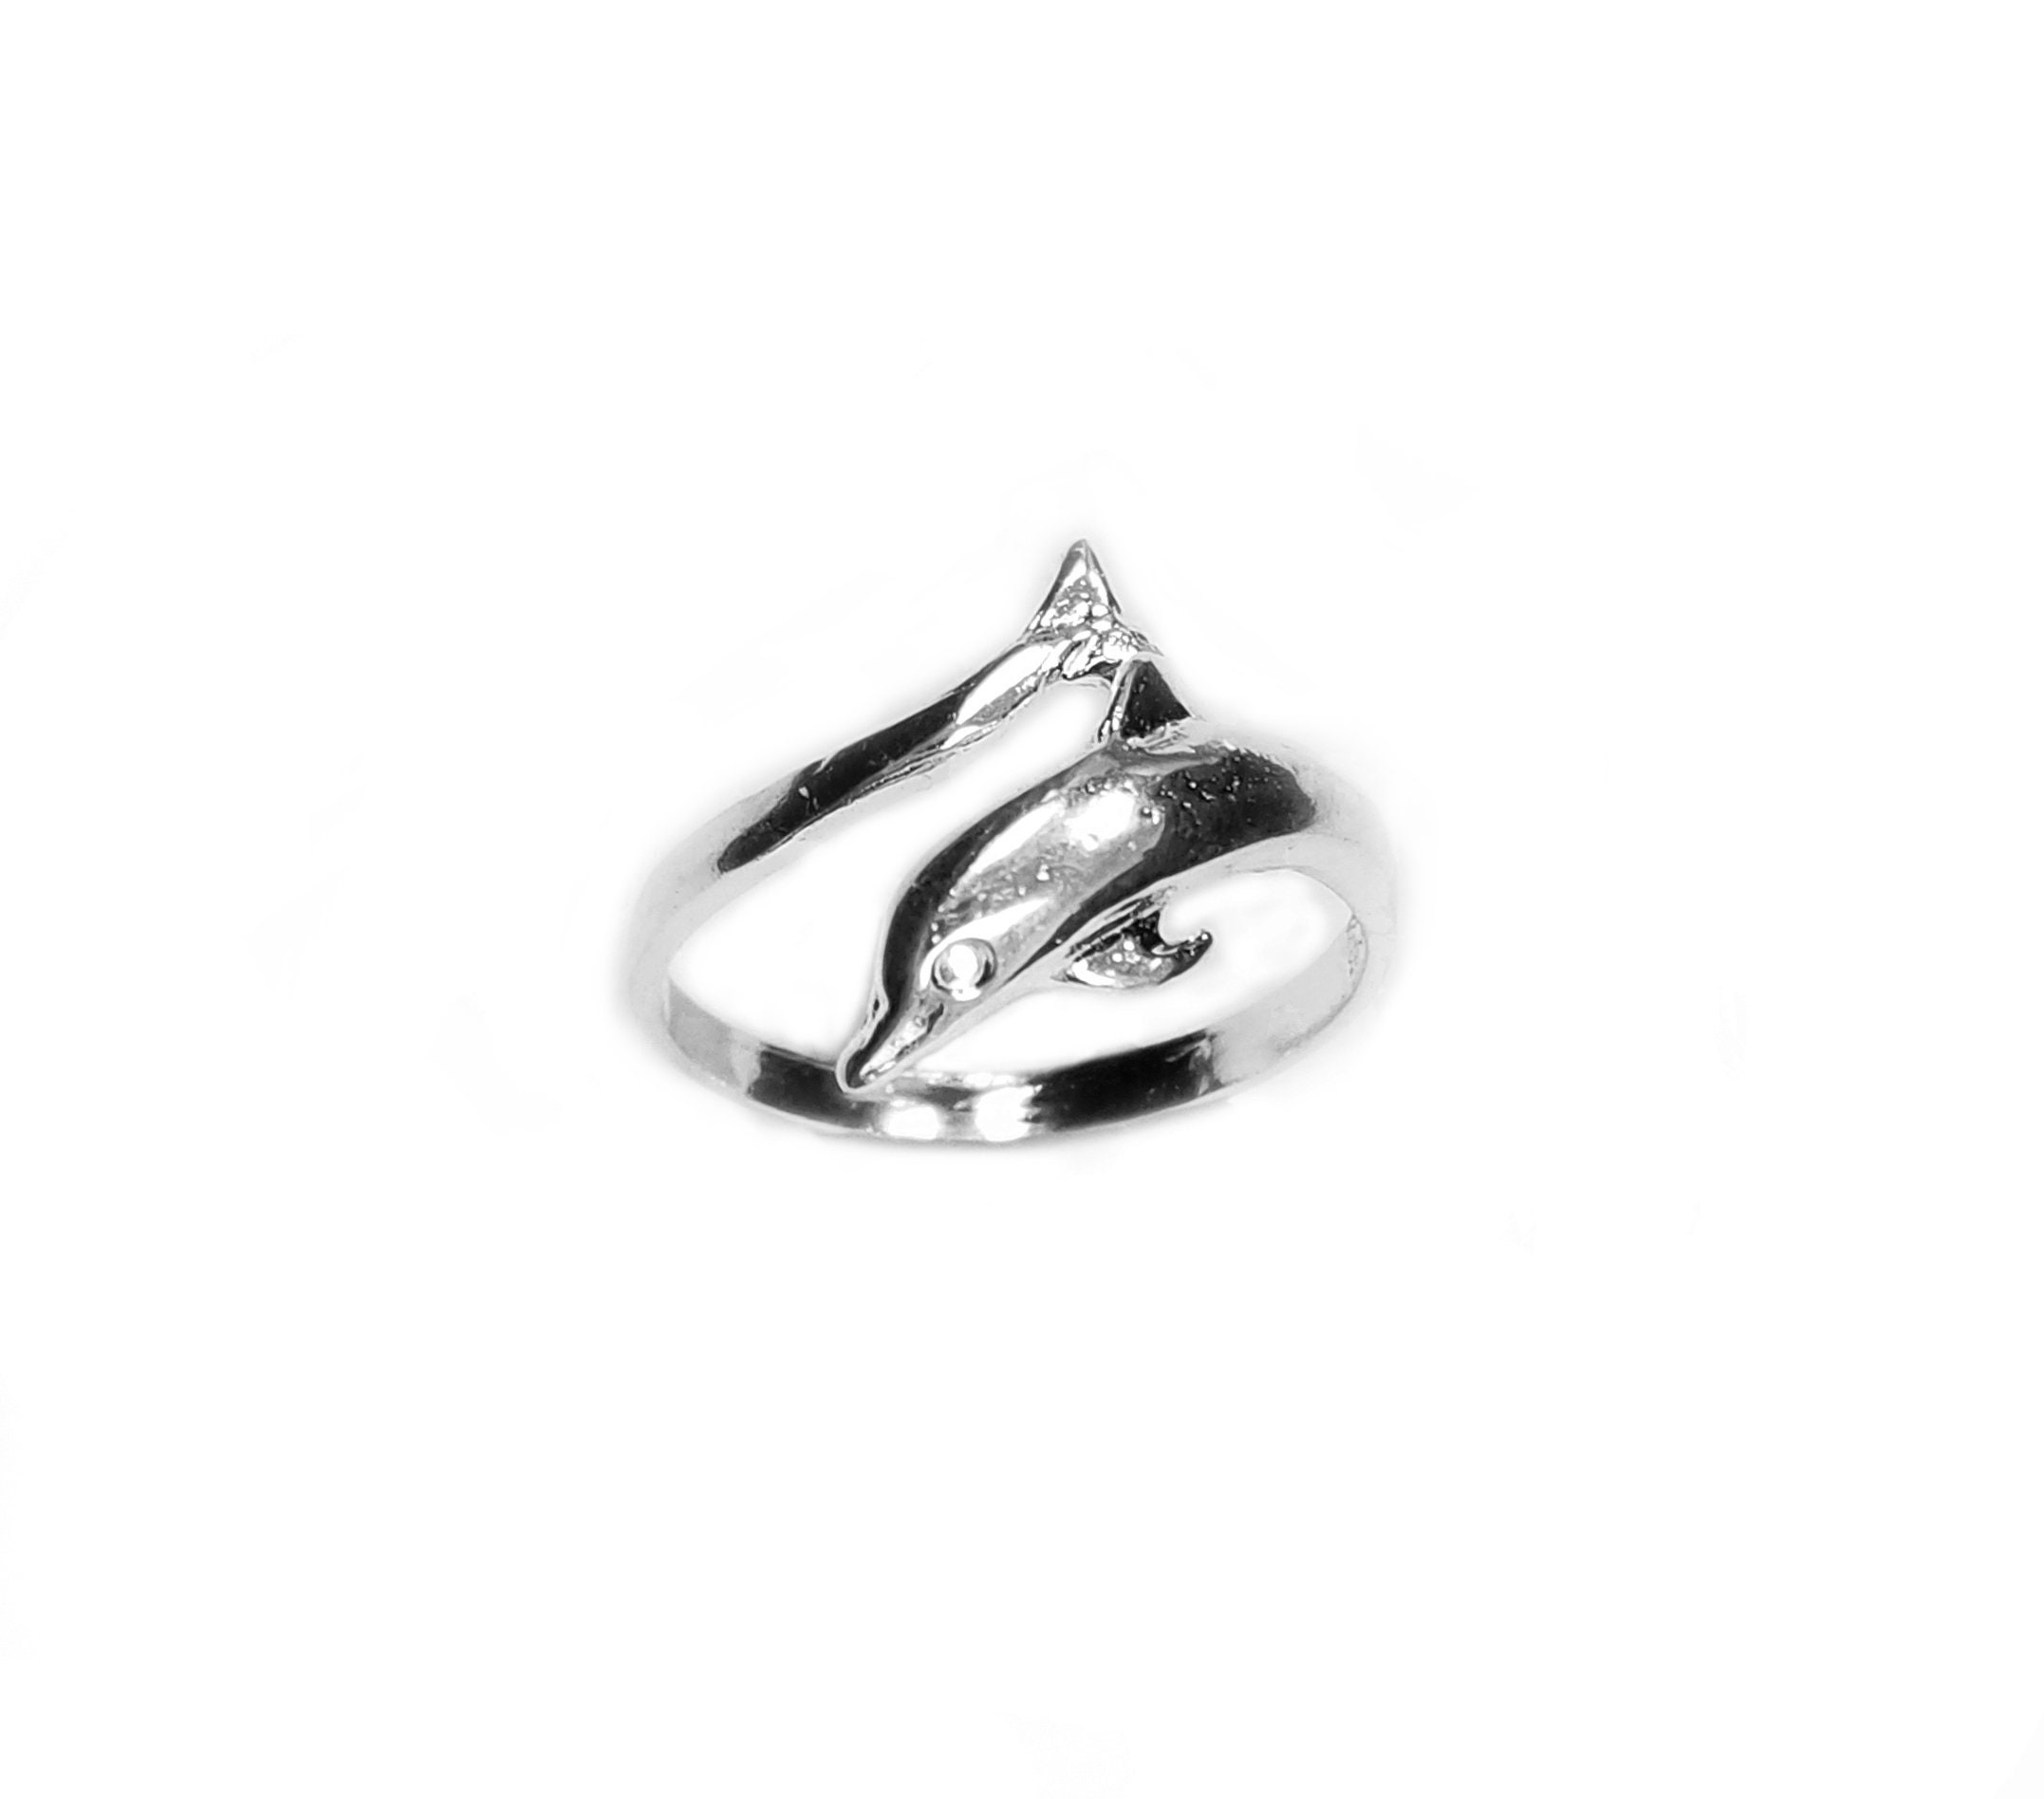 90's Dolphin design  silver 925 ring